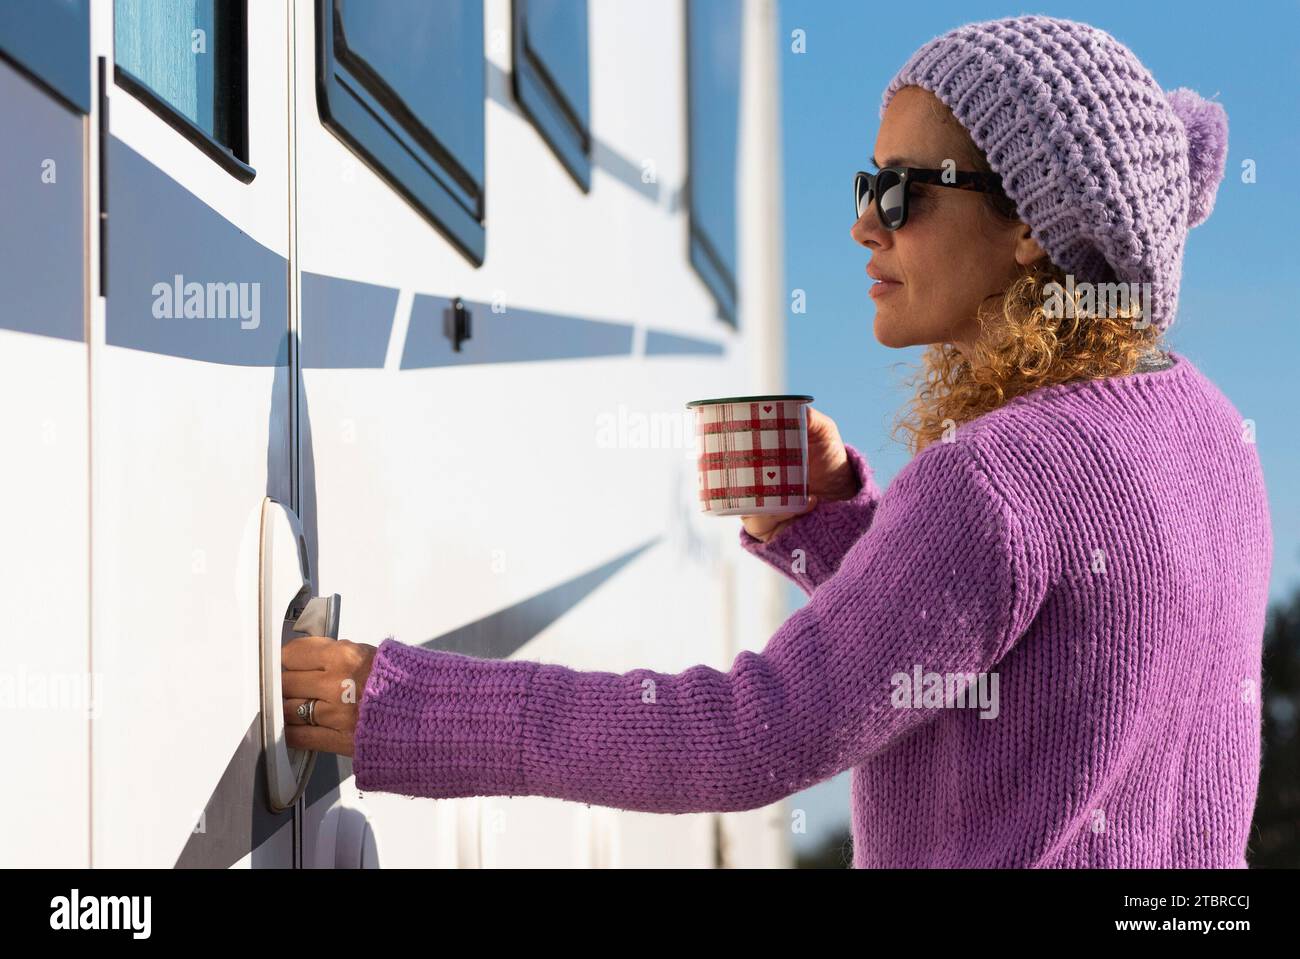 One pretty woman open the door of her camper van ready to leave and start travel adventure alone, Empowerment female people driving rv vehicle. Alone tourist lady with violet pullover enter on camper Stock Photo